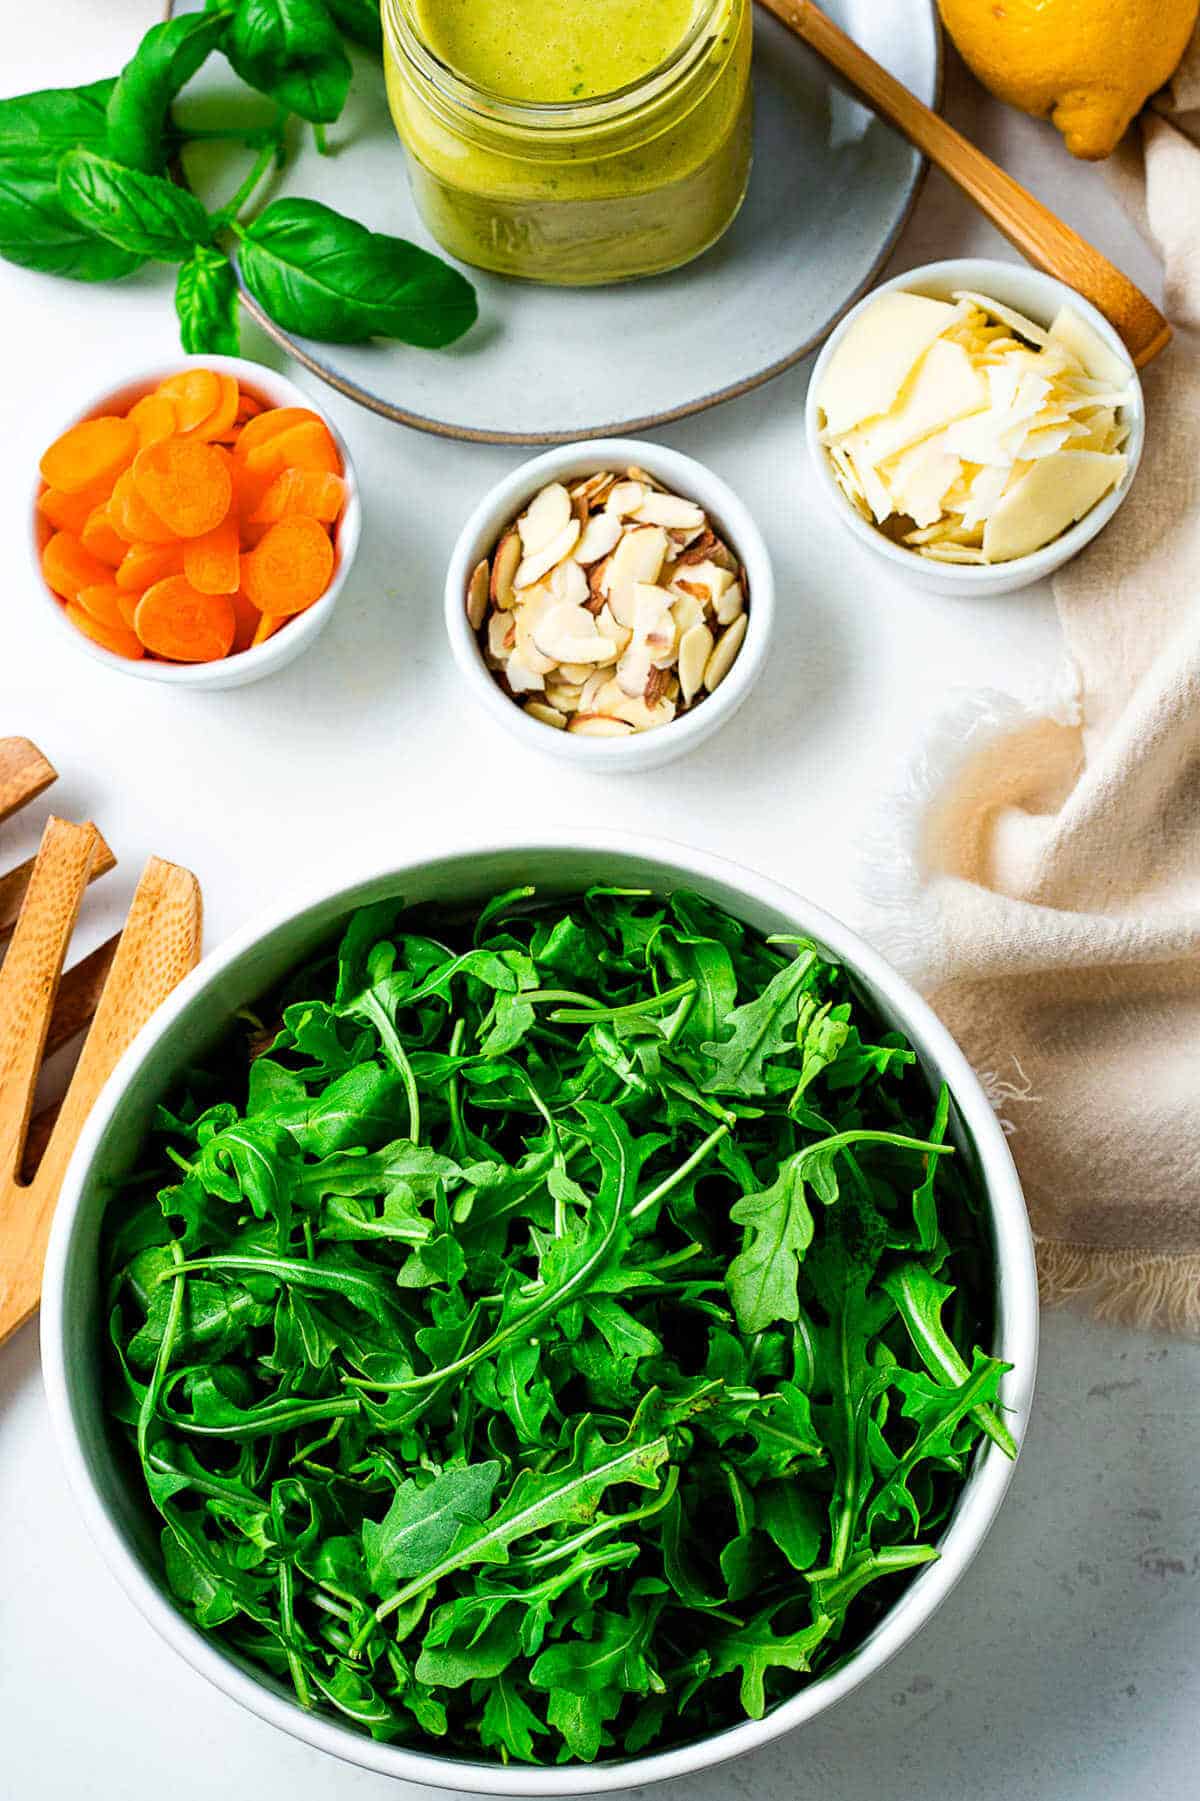 A bowl of arugula, sliced carrots, almonds, and shaved parmesan cheese with a jar of lemon basil dressing on a table.